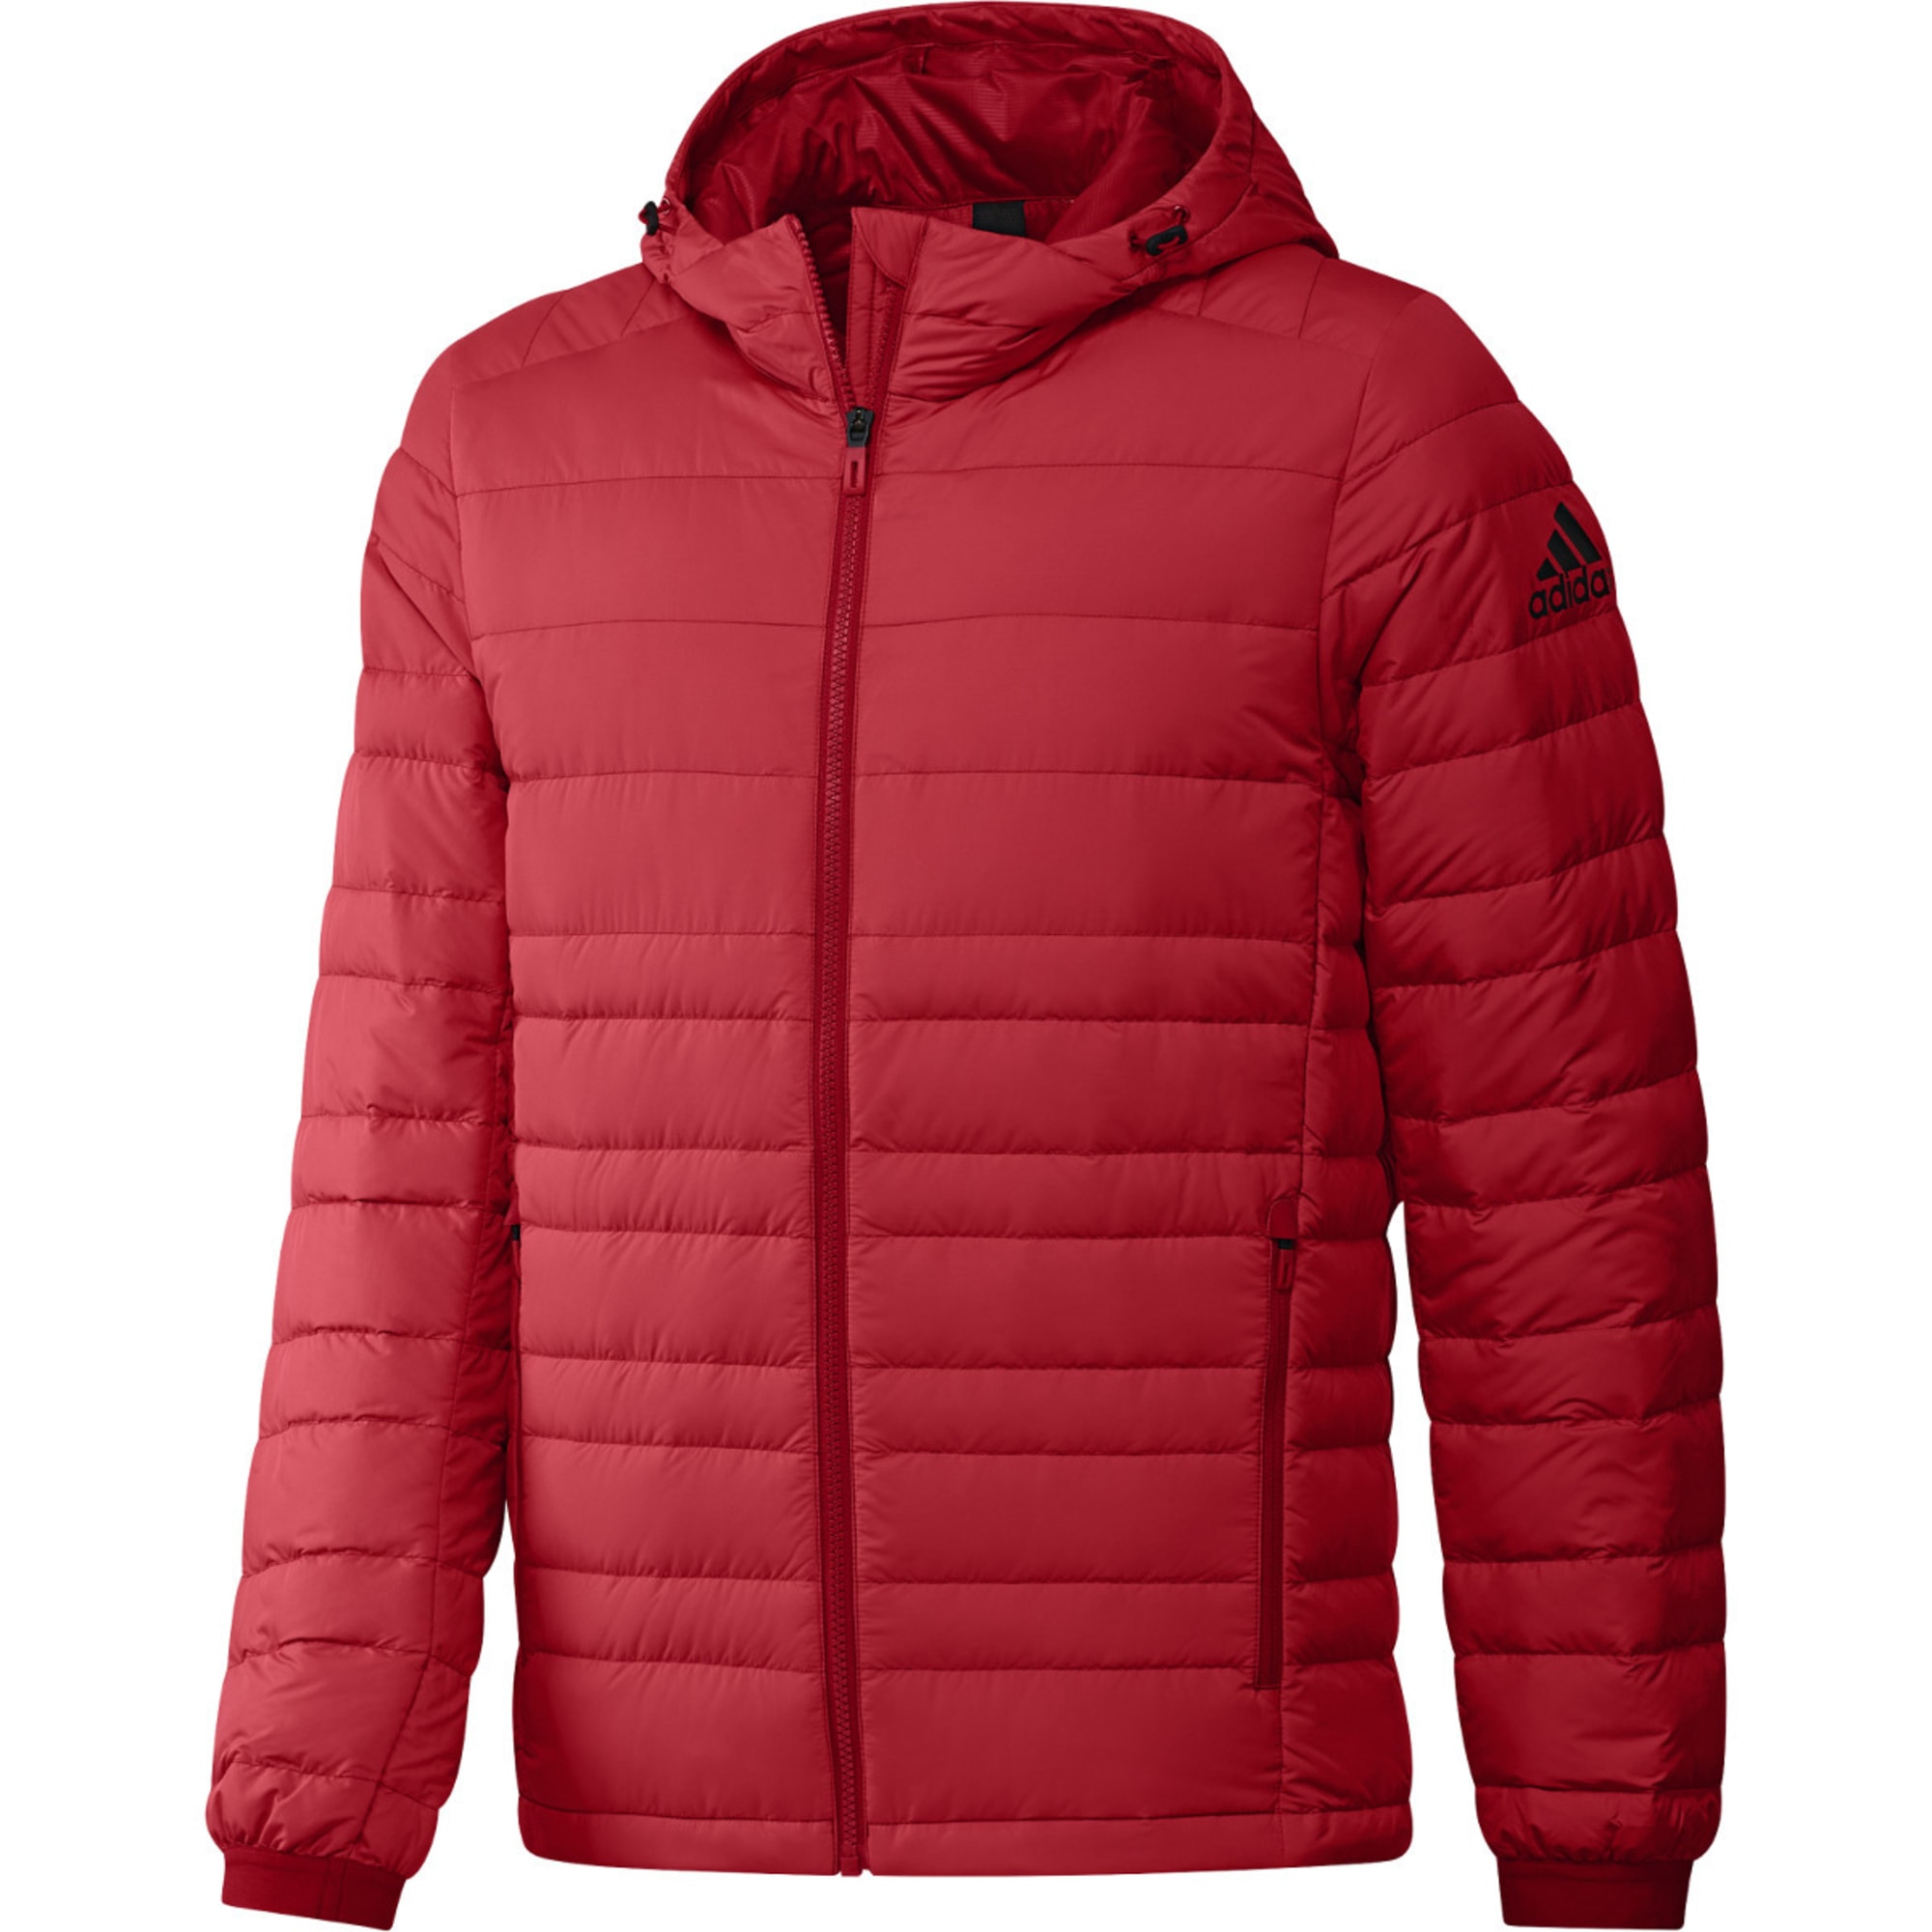 cristal Morbosidad compromiso ADIDAS Men's Climawarm Nuvic Hooded Down Jacket - Eastern Mountain Sports